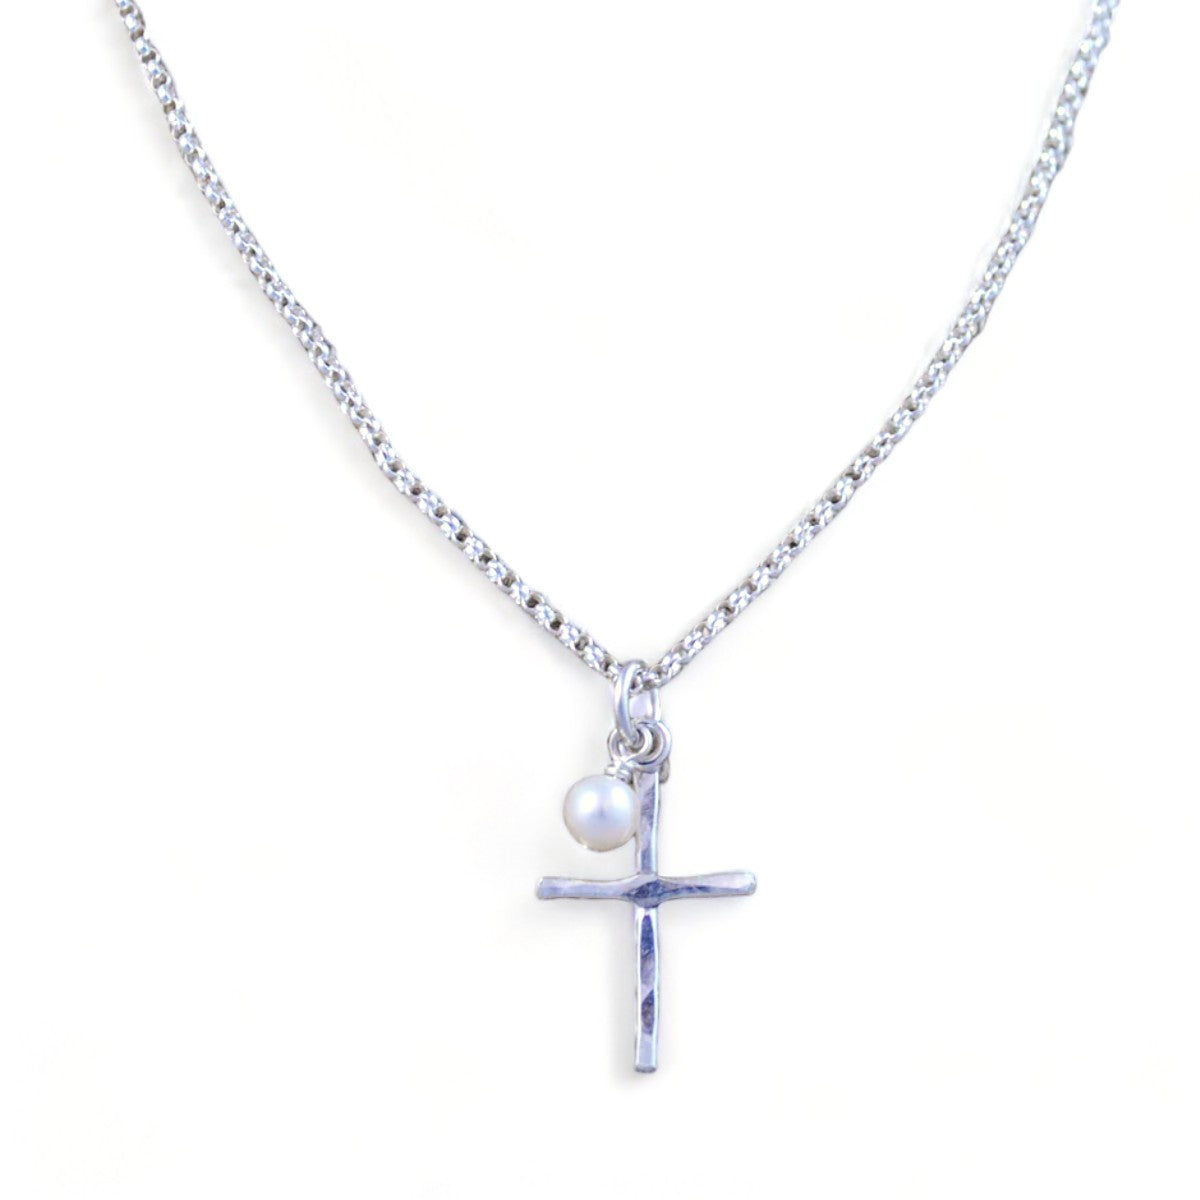 Cross and Pearl Pendant - sterling silver